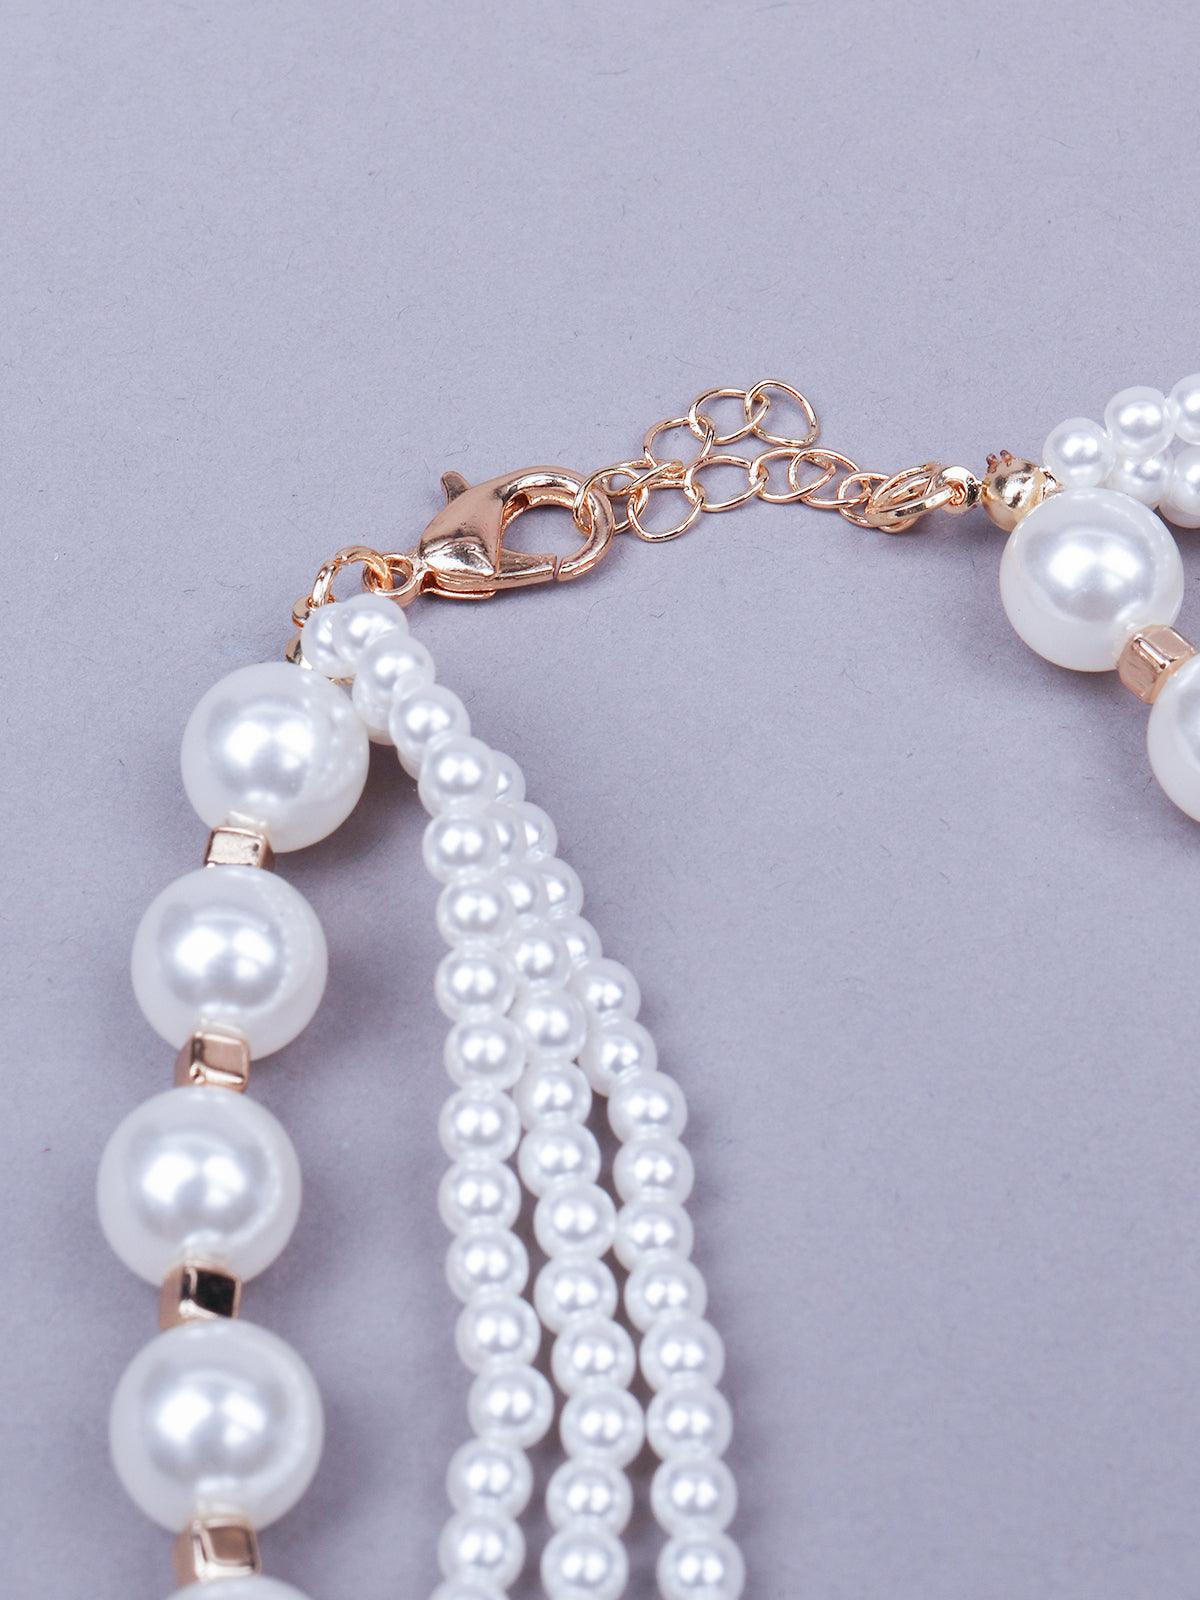 Women's Gorgeous Multilayered Faux Pearl Statement Necklace - Odette